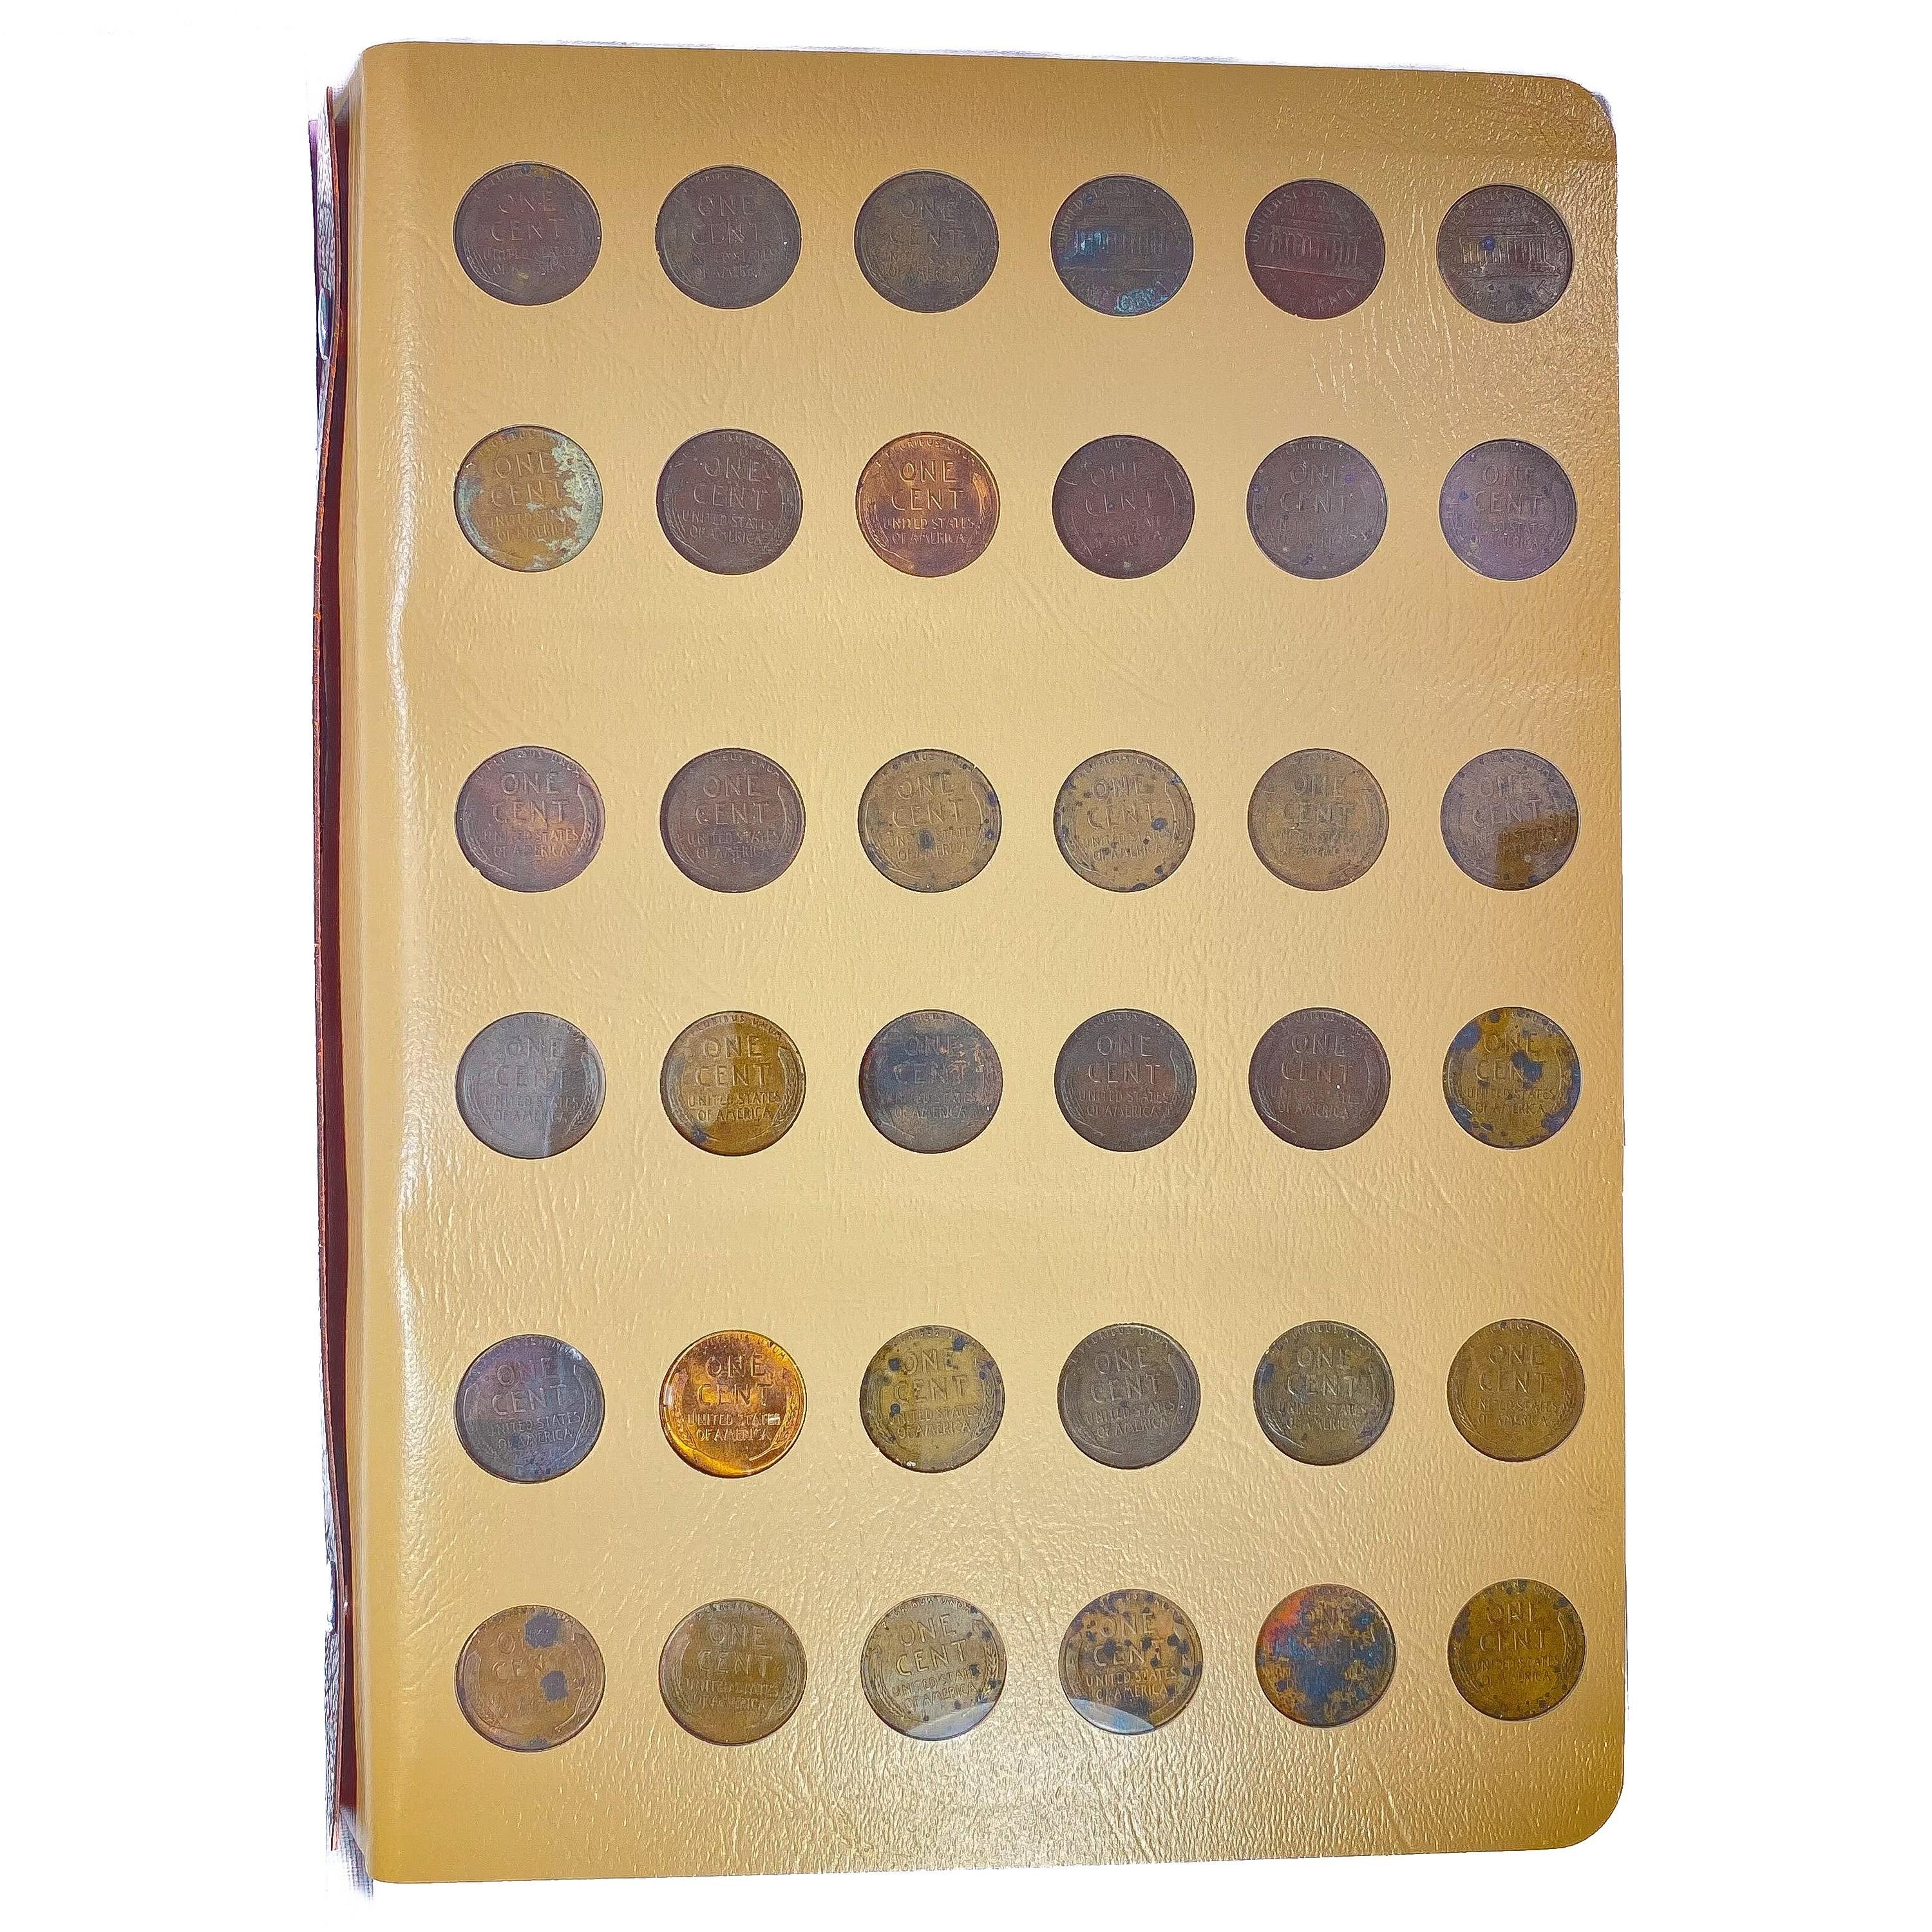 1909-1960 Lincoln Cent Book (131 Coins)